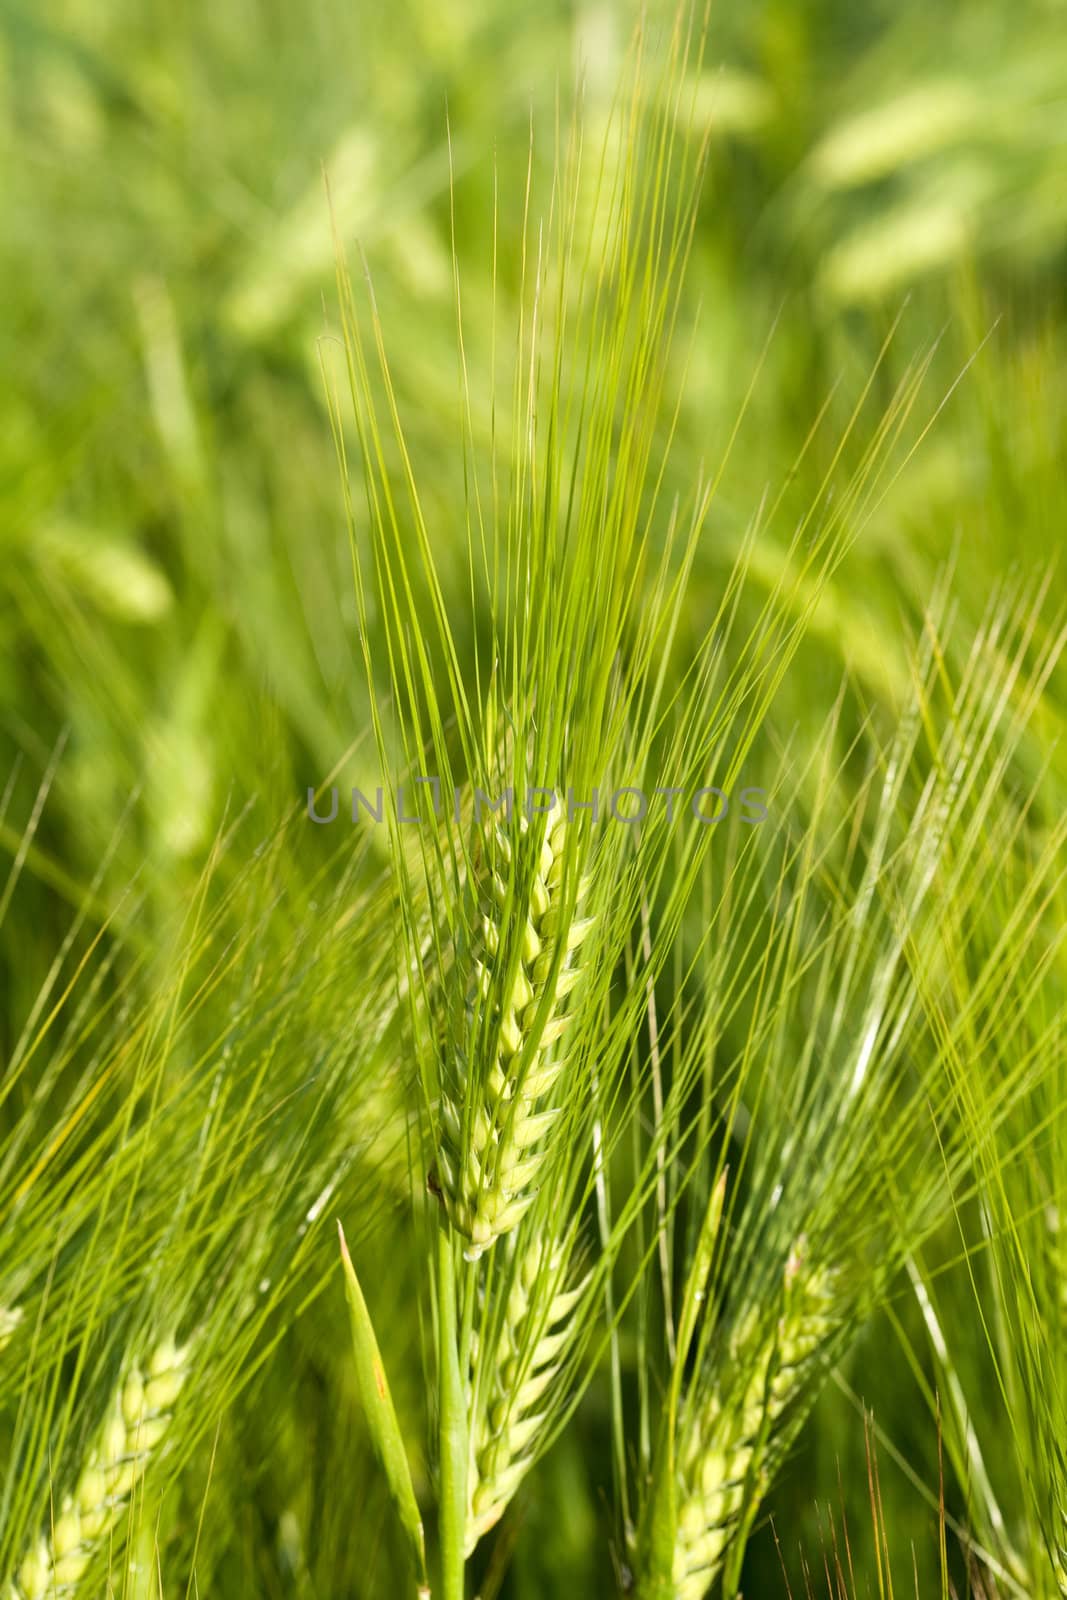 Agriculture theme: an image of green oat